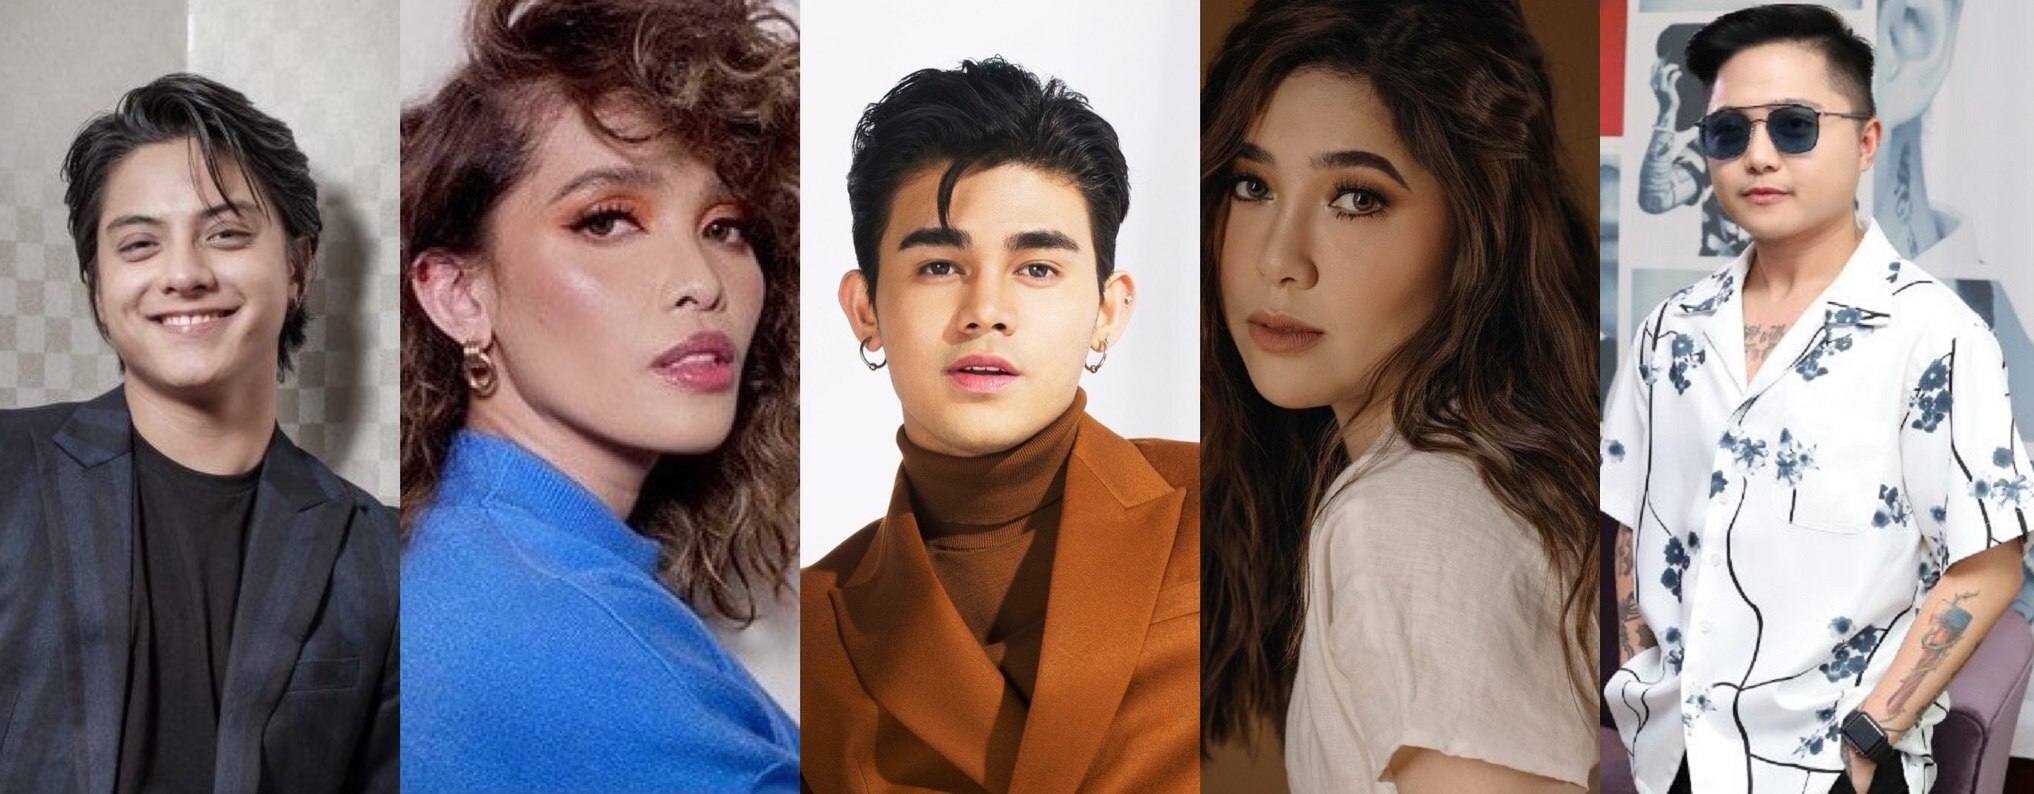 Kapamilya artists dominated the winners in this year's Star Awards for Music